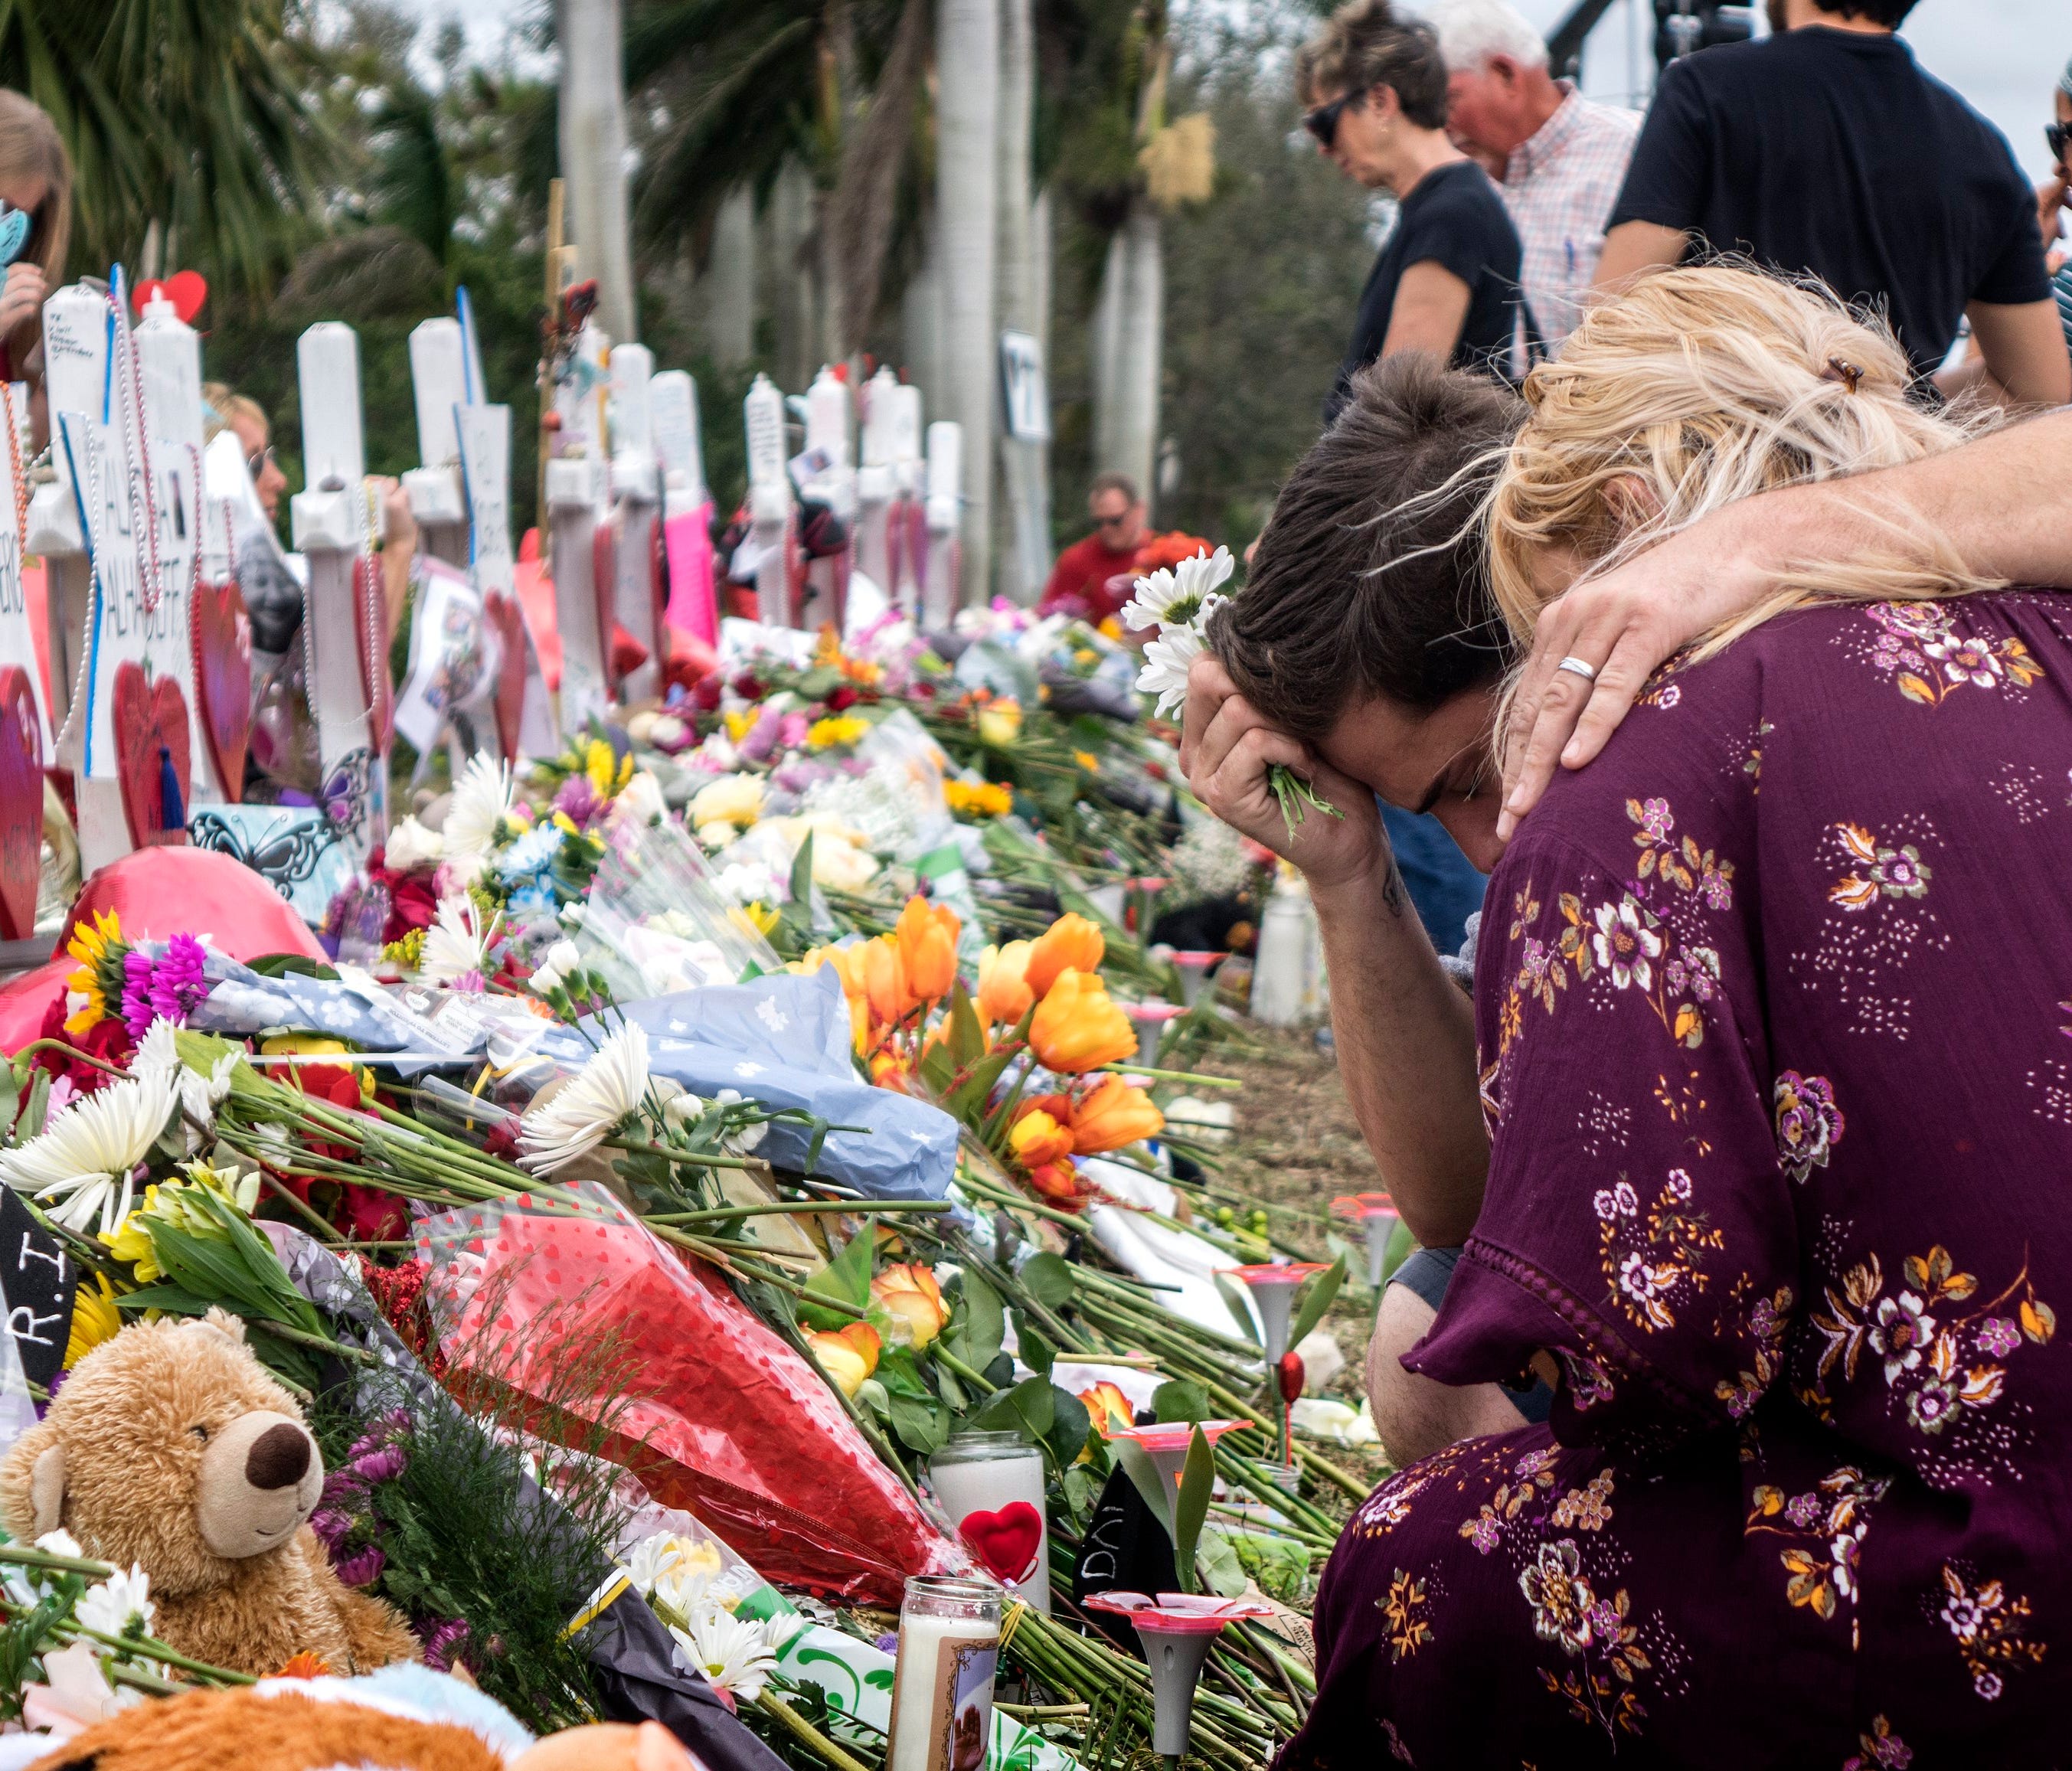 People visit a makeshift memorial in front of the Marjory Stoneman Douglas High School in, Parkland, Florida on Feb. 20, 2018.